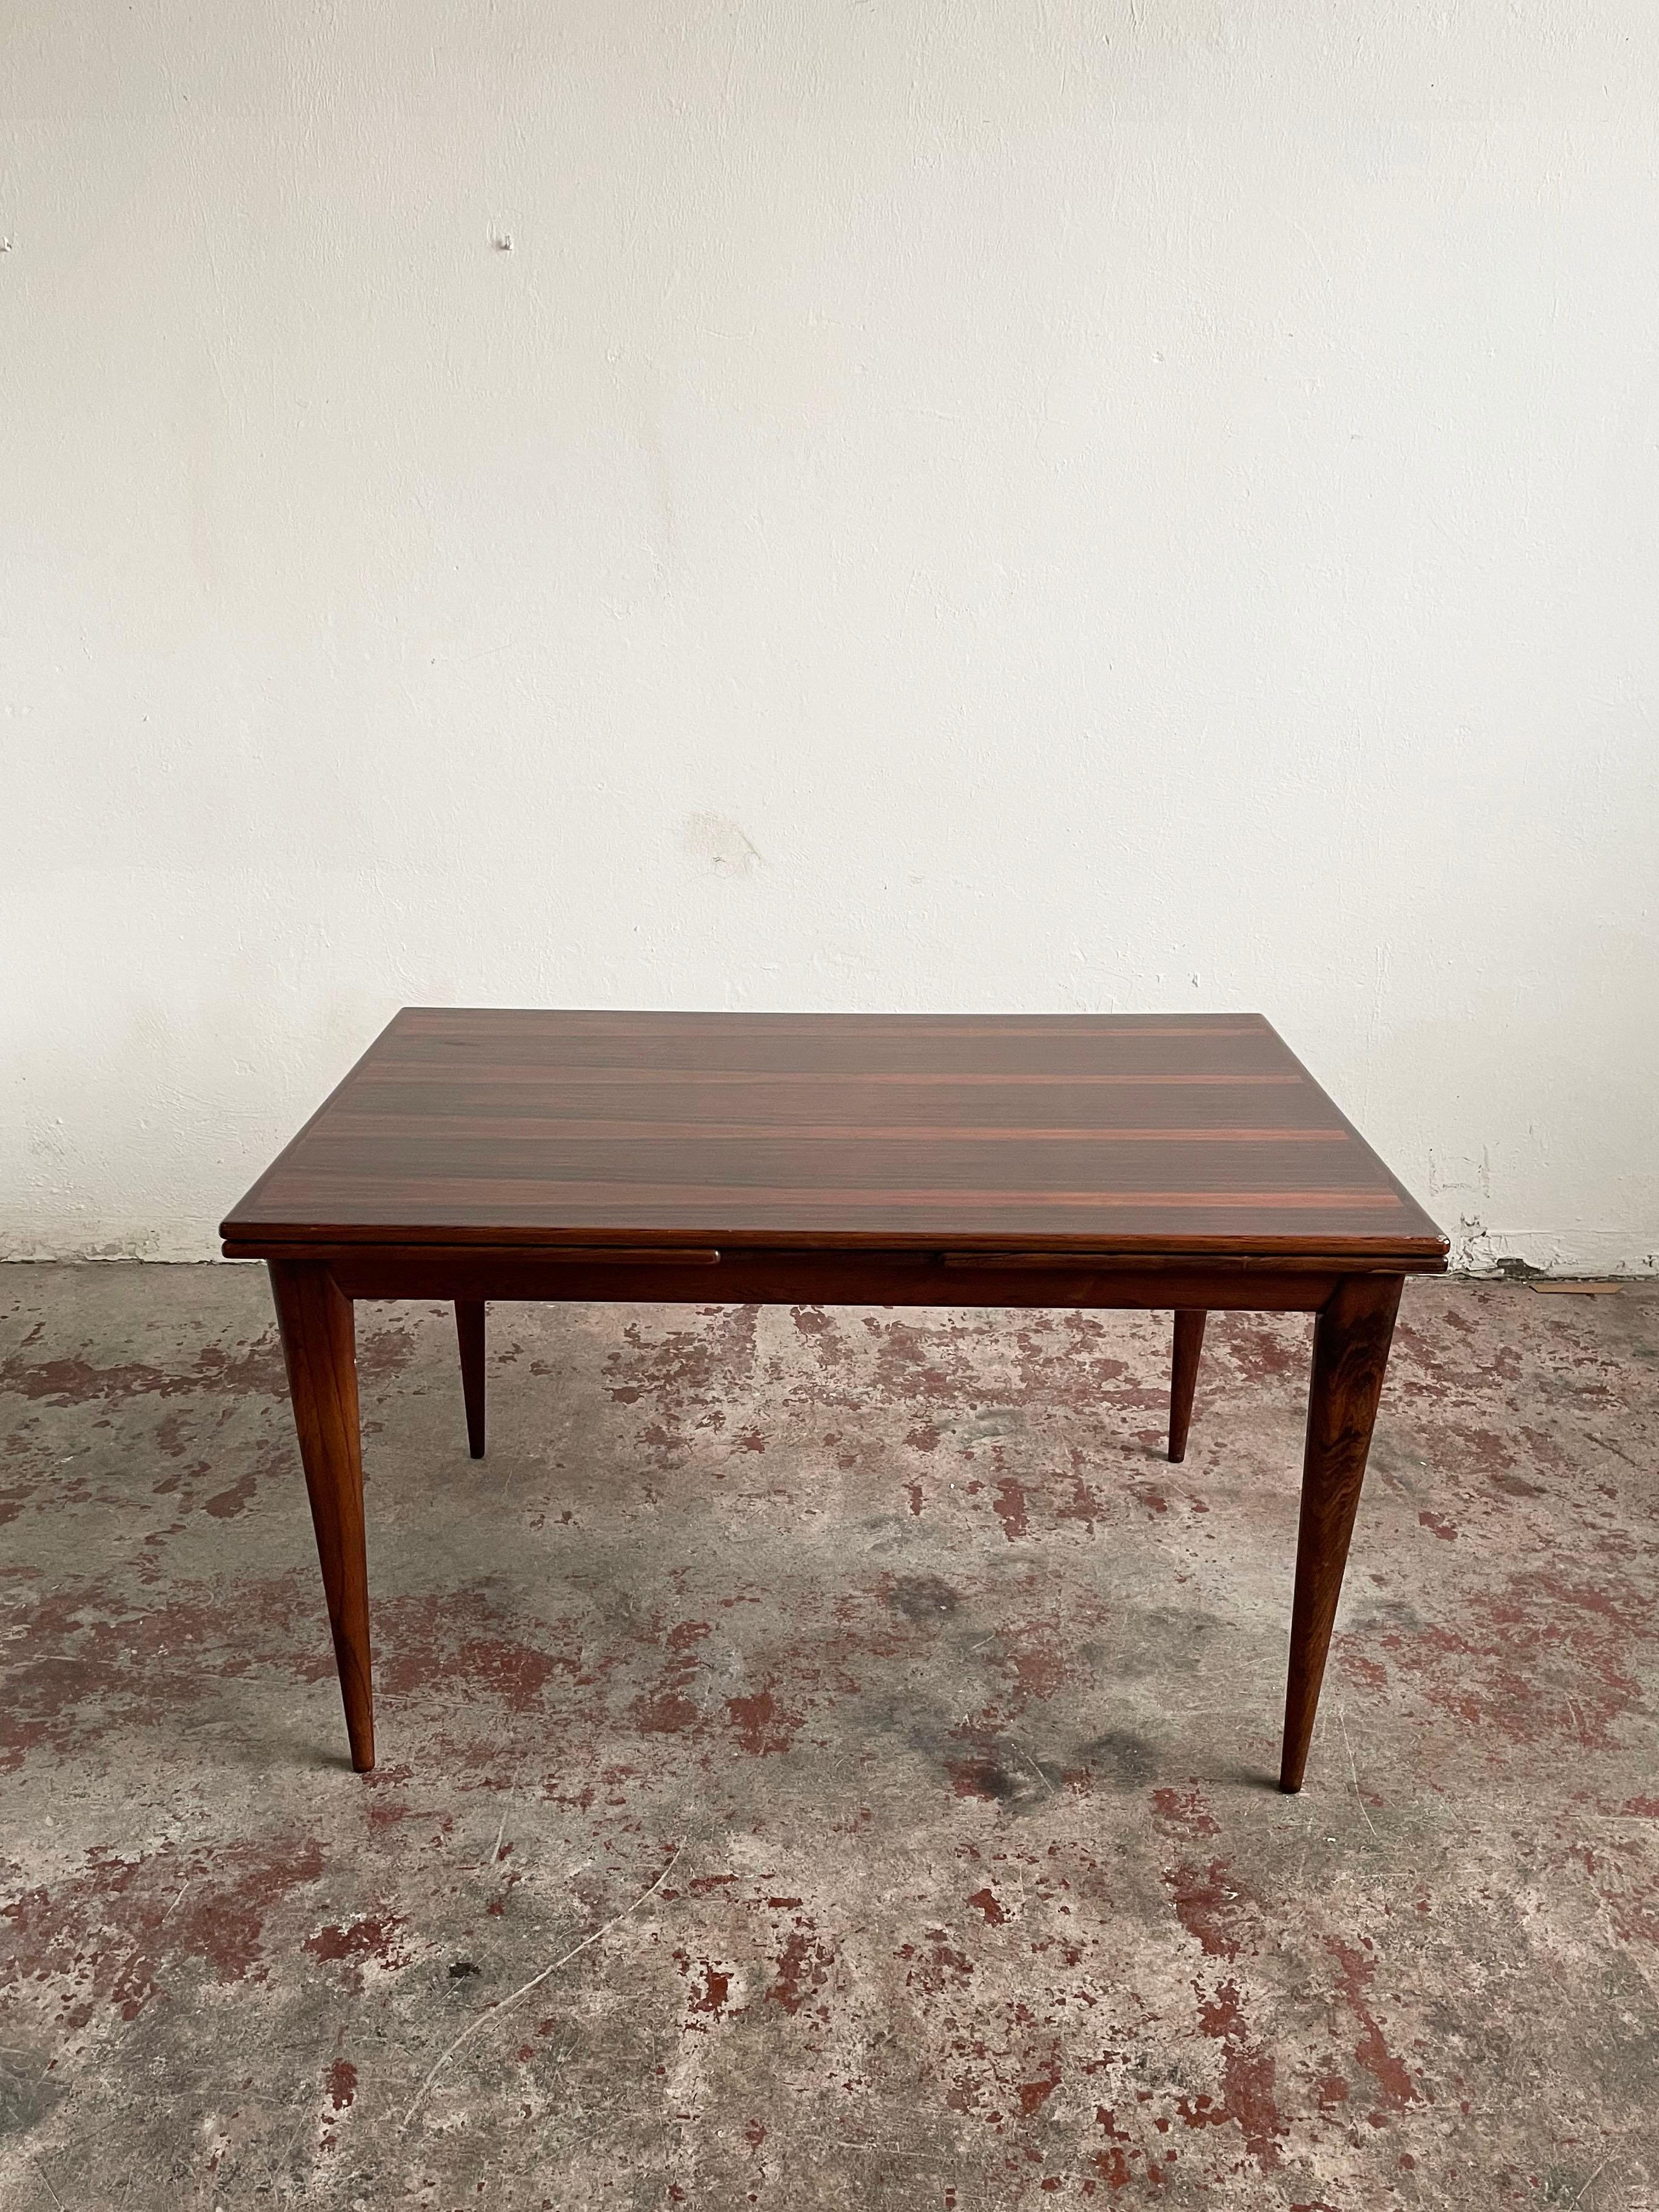 This rosewood model 254 dining table was designed by Niels O. Møller and produced by J.L Møllers Møbelfabrik in Denmark during the 1950s.

Iconic Scandinavian Mid-Century Modern design

The piece extends from 139 to 236 cm in length.

The table is